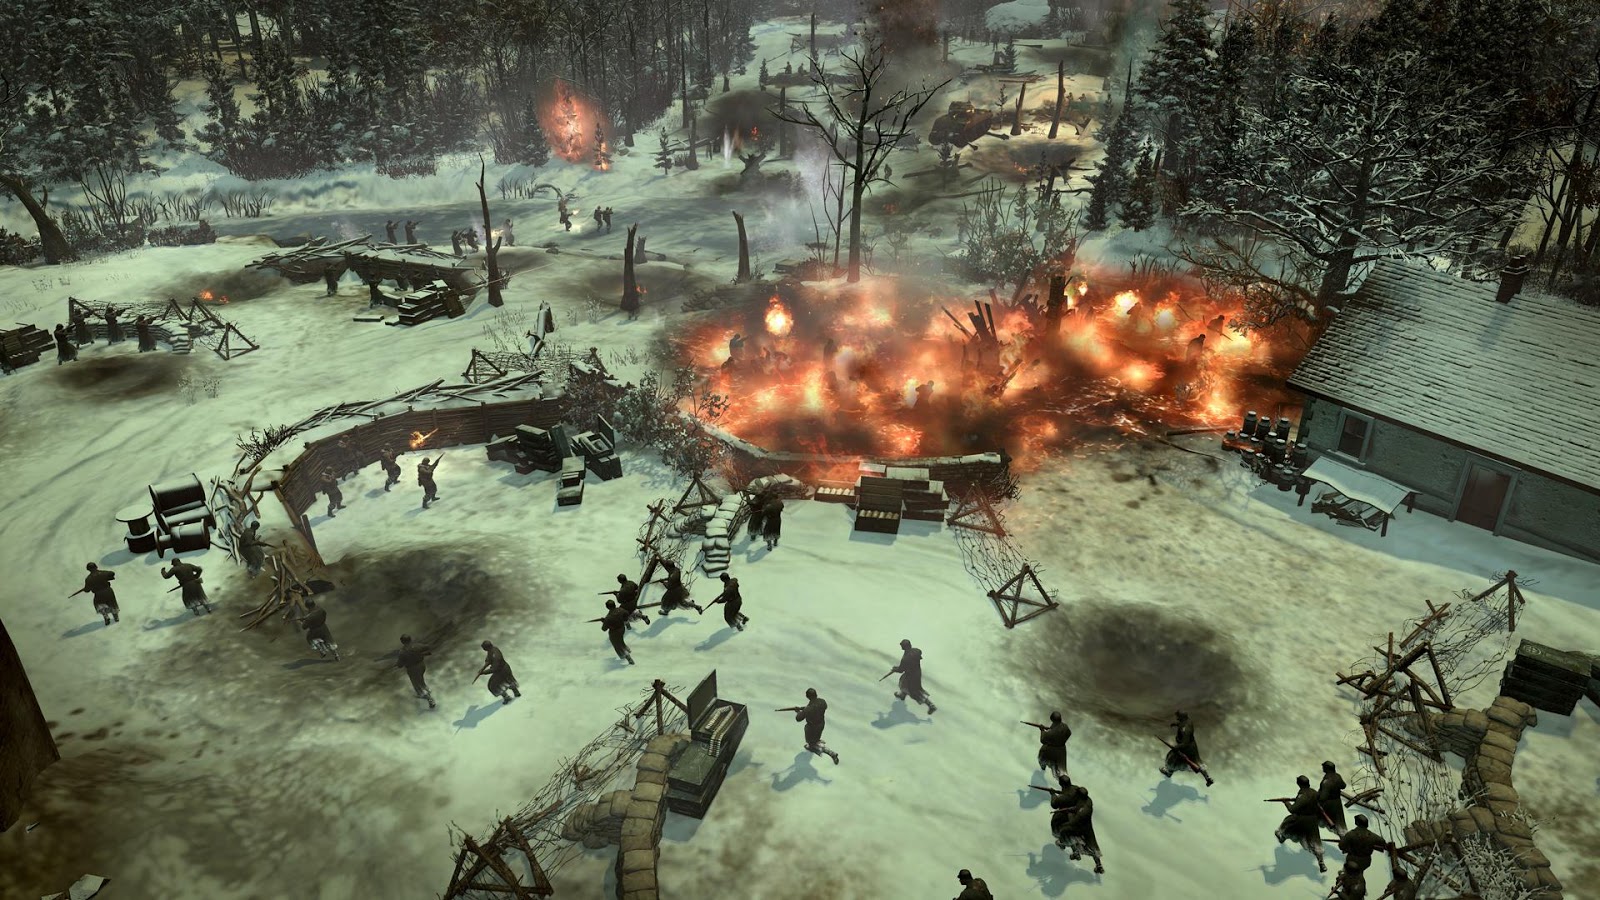 will intel 82865g graphics controller run my company of heroes